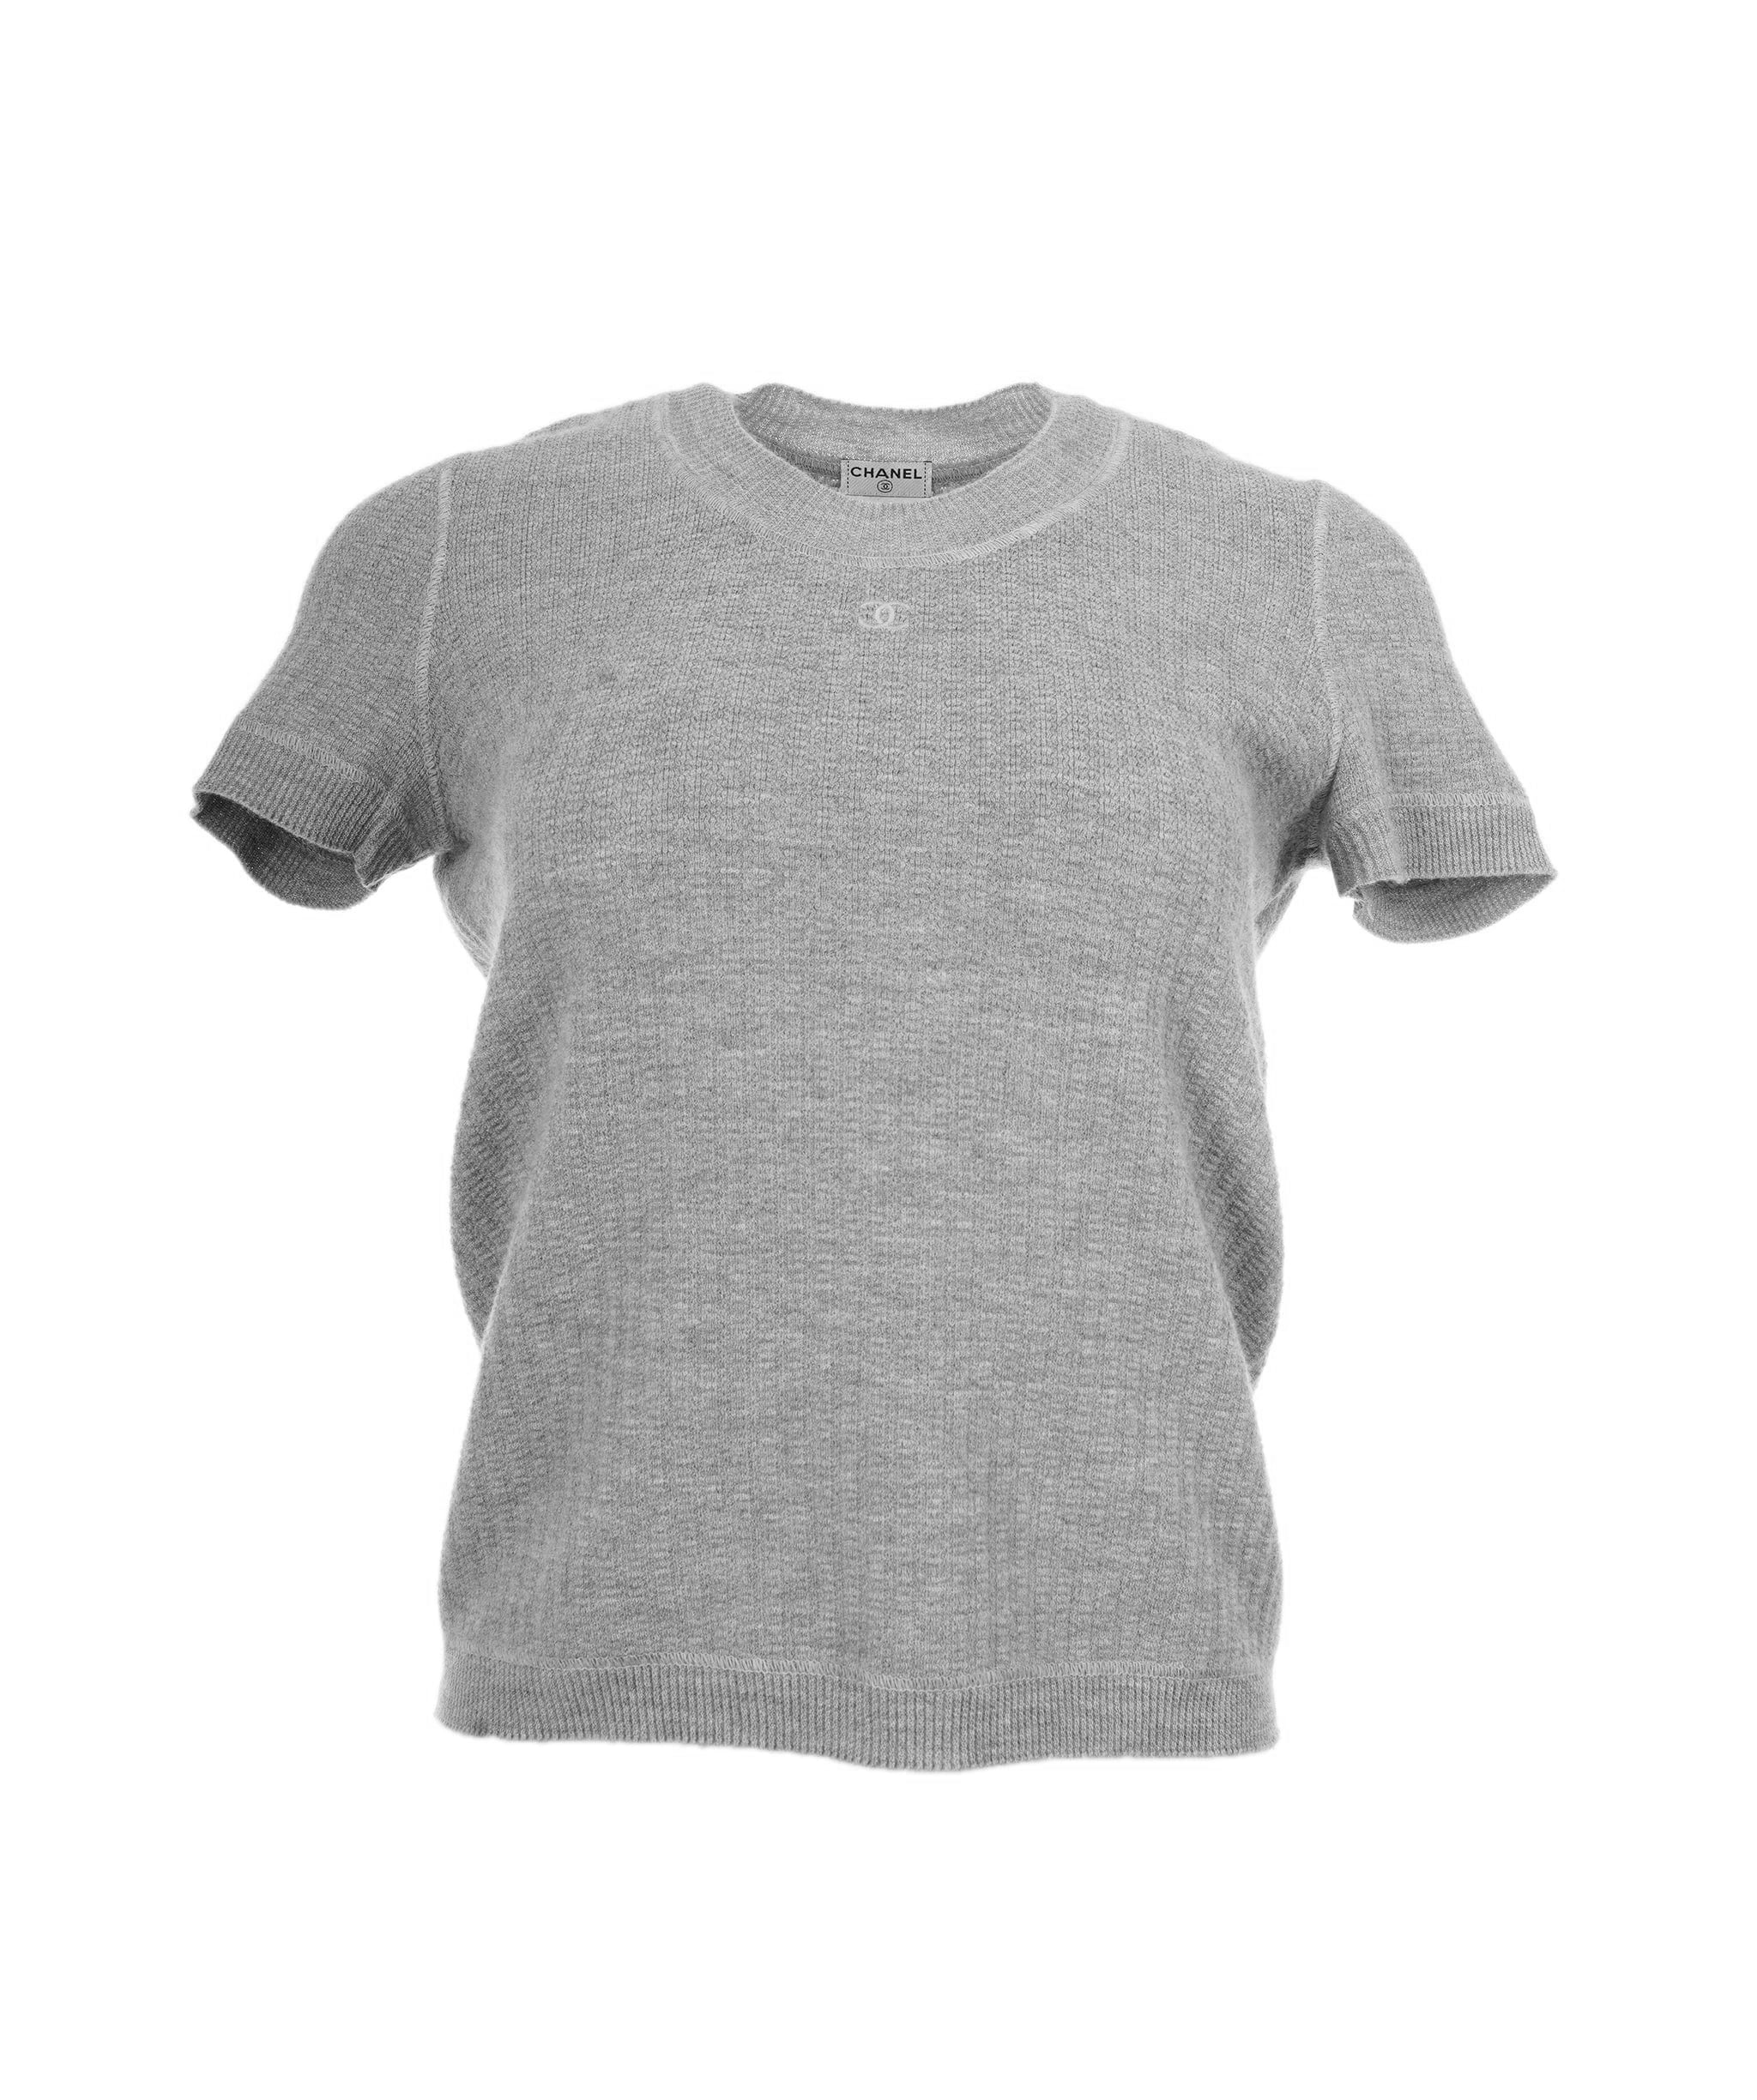 Chanel Chanel 07A CC Knit Top Gray ASL7166